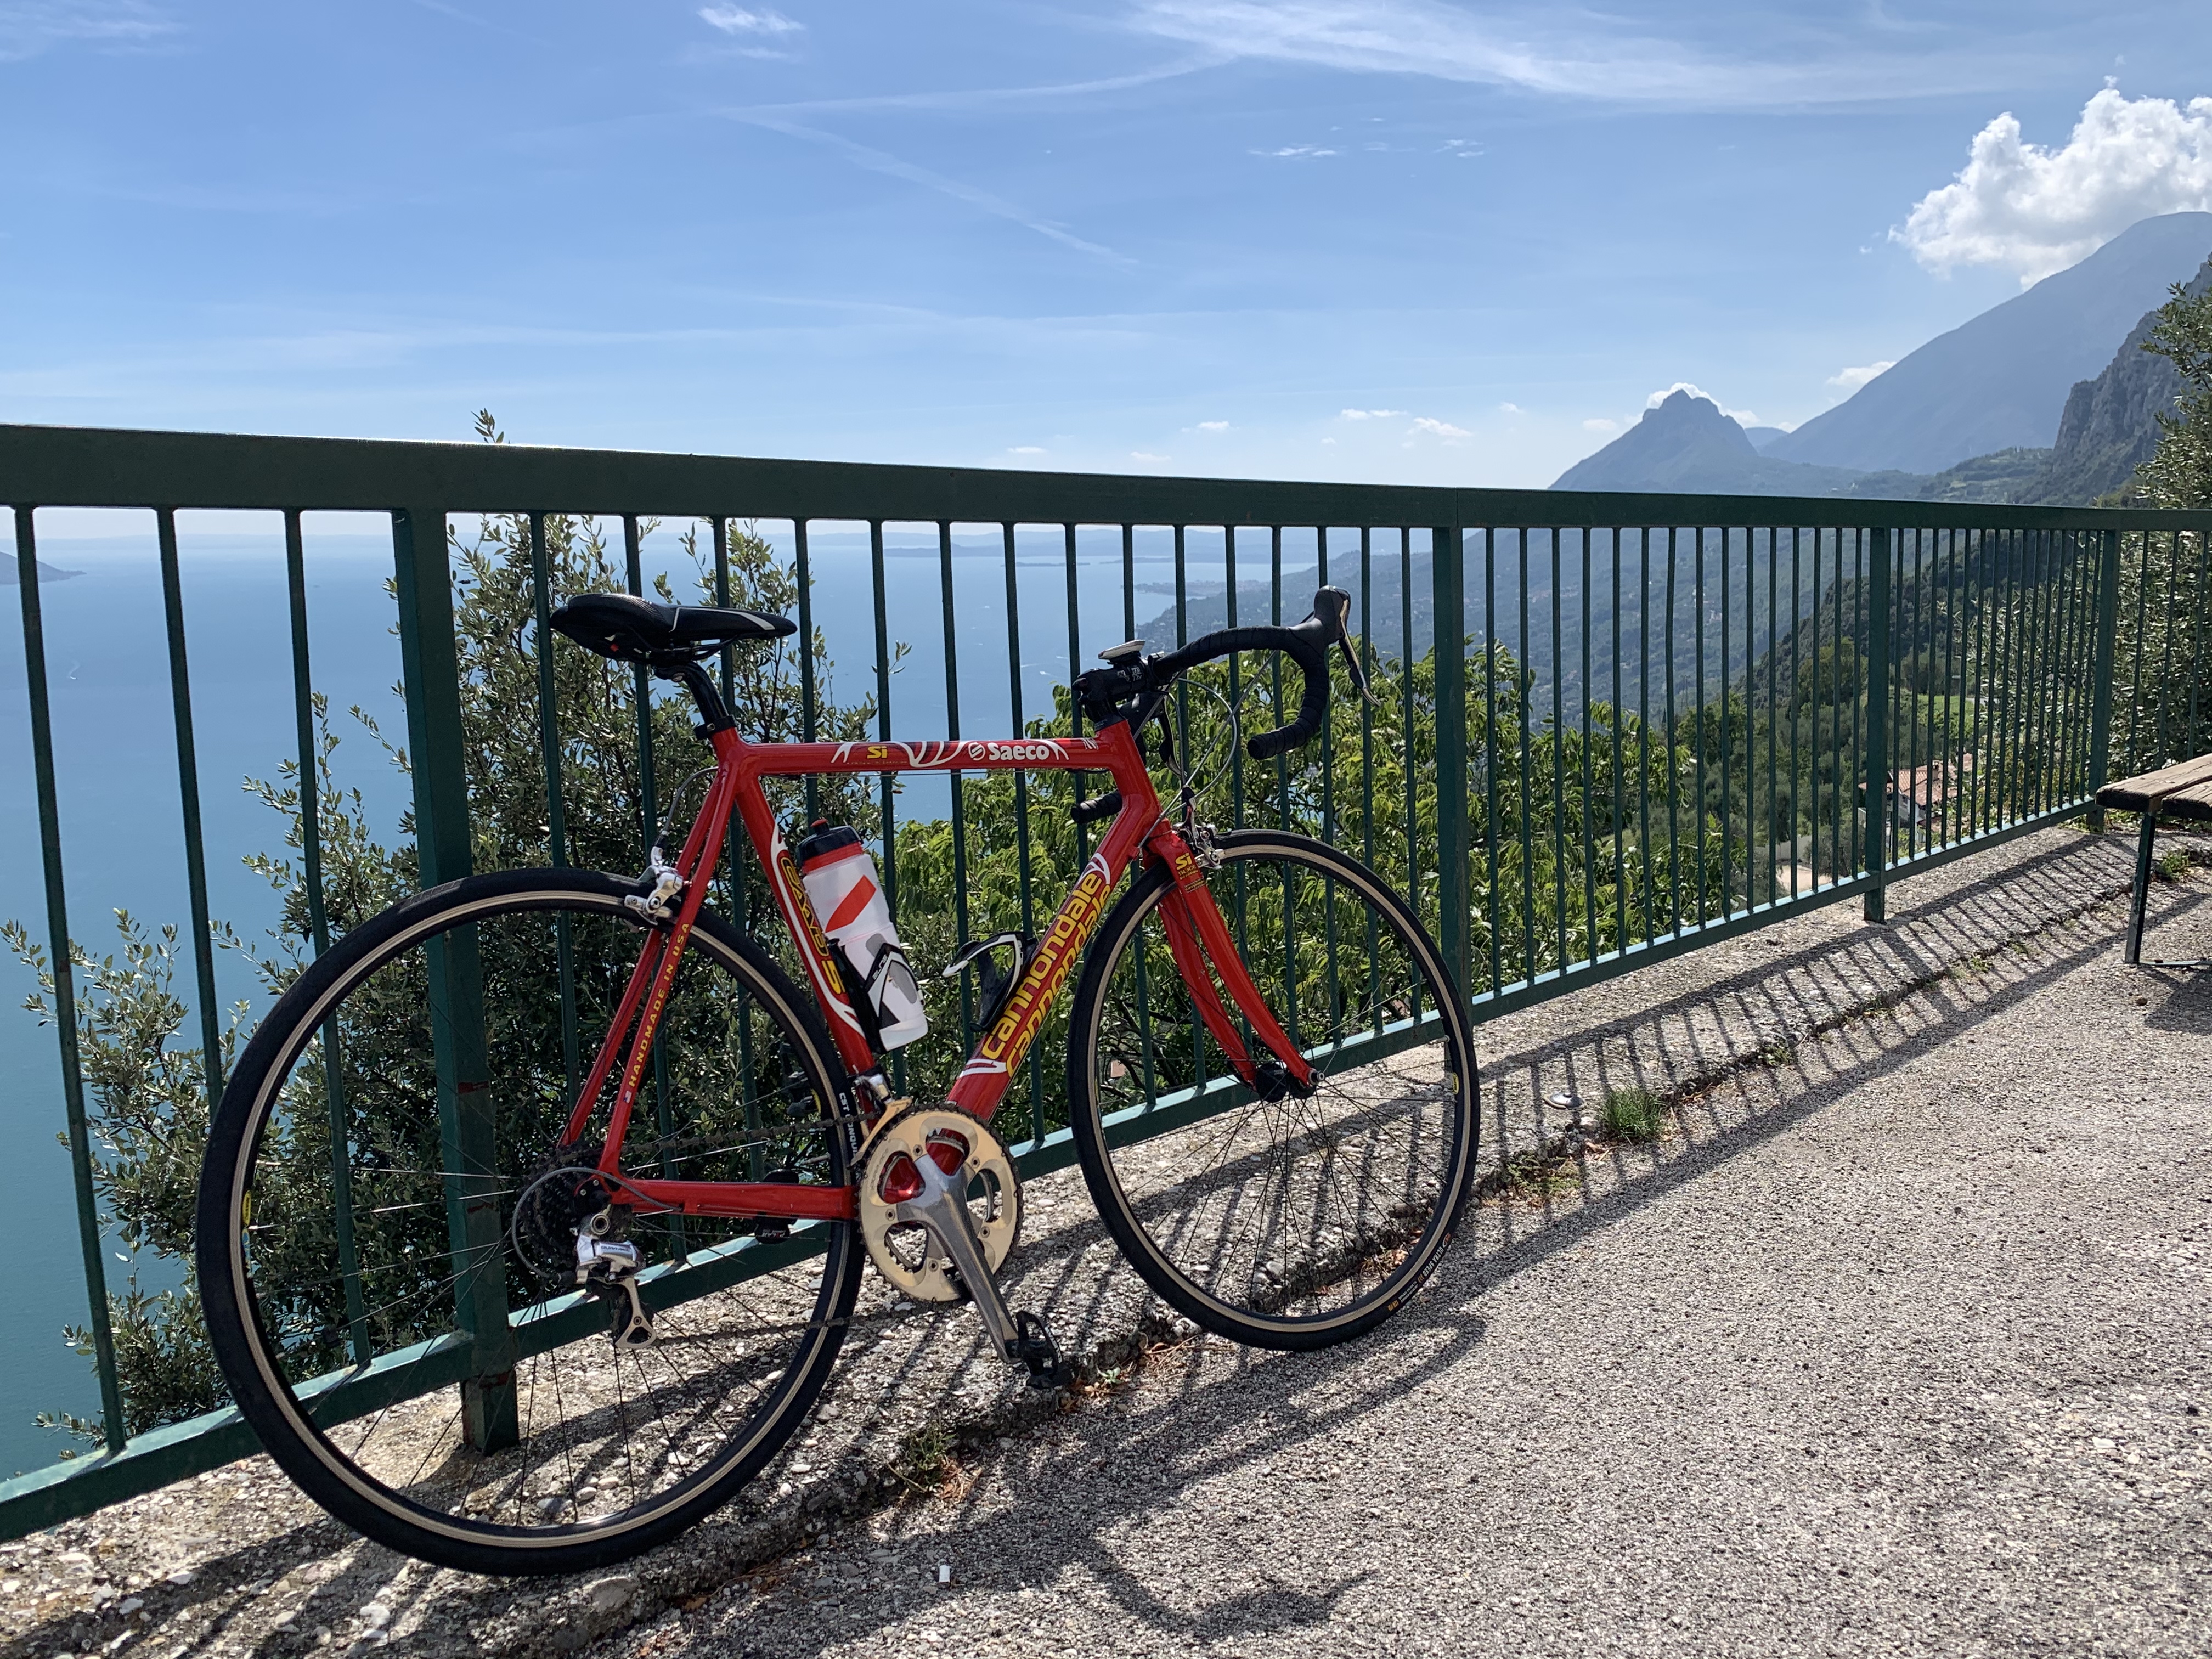 Cannondale CAAD 5, replica Team Saeco, 2001/2002, between the mountains of Garda Lake, foto.